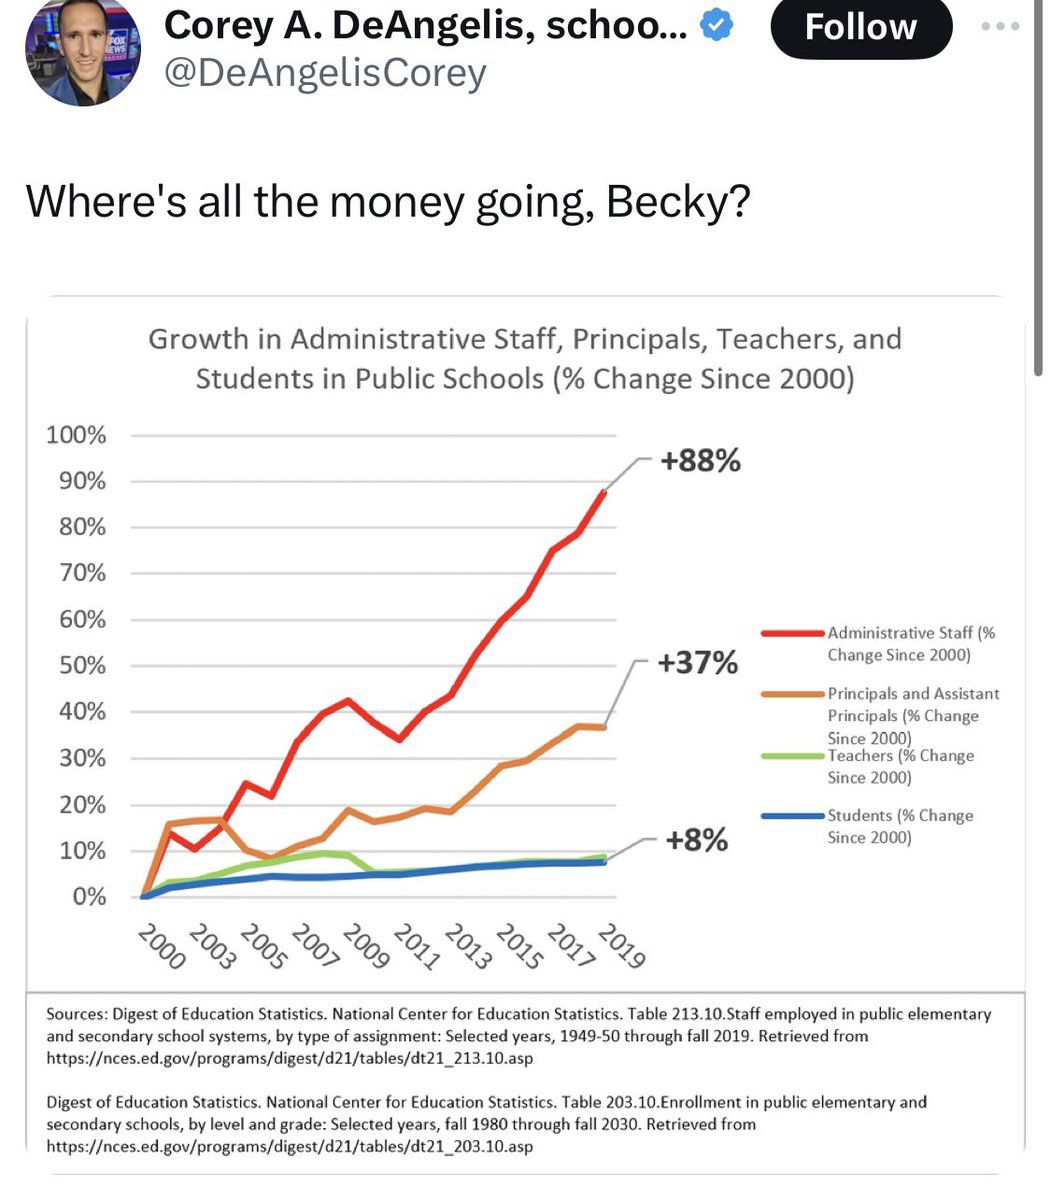 One of the easiest ways to mislead with data is by showing percent change. For example, the 88% increase represents just 1.7% of all staff in 2000, and the 37% increase represents 2.5%. Meanwhile, 51.5% of all staff were teachers in 2000. 1/